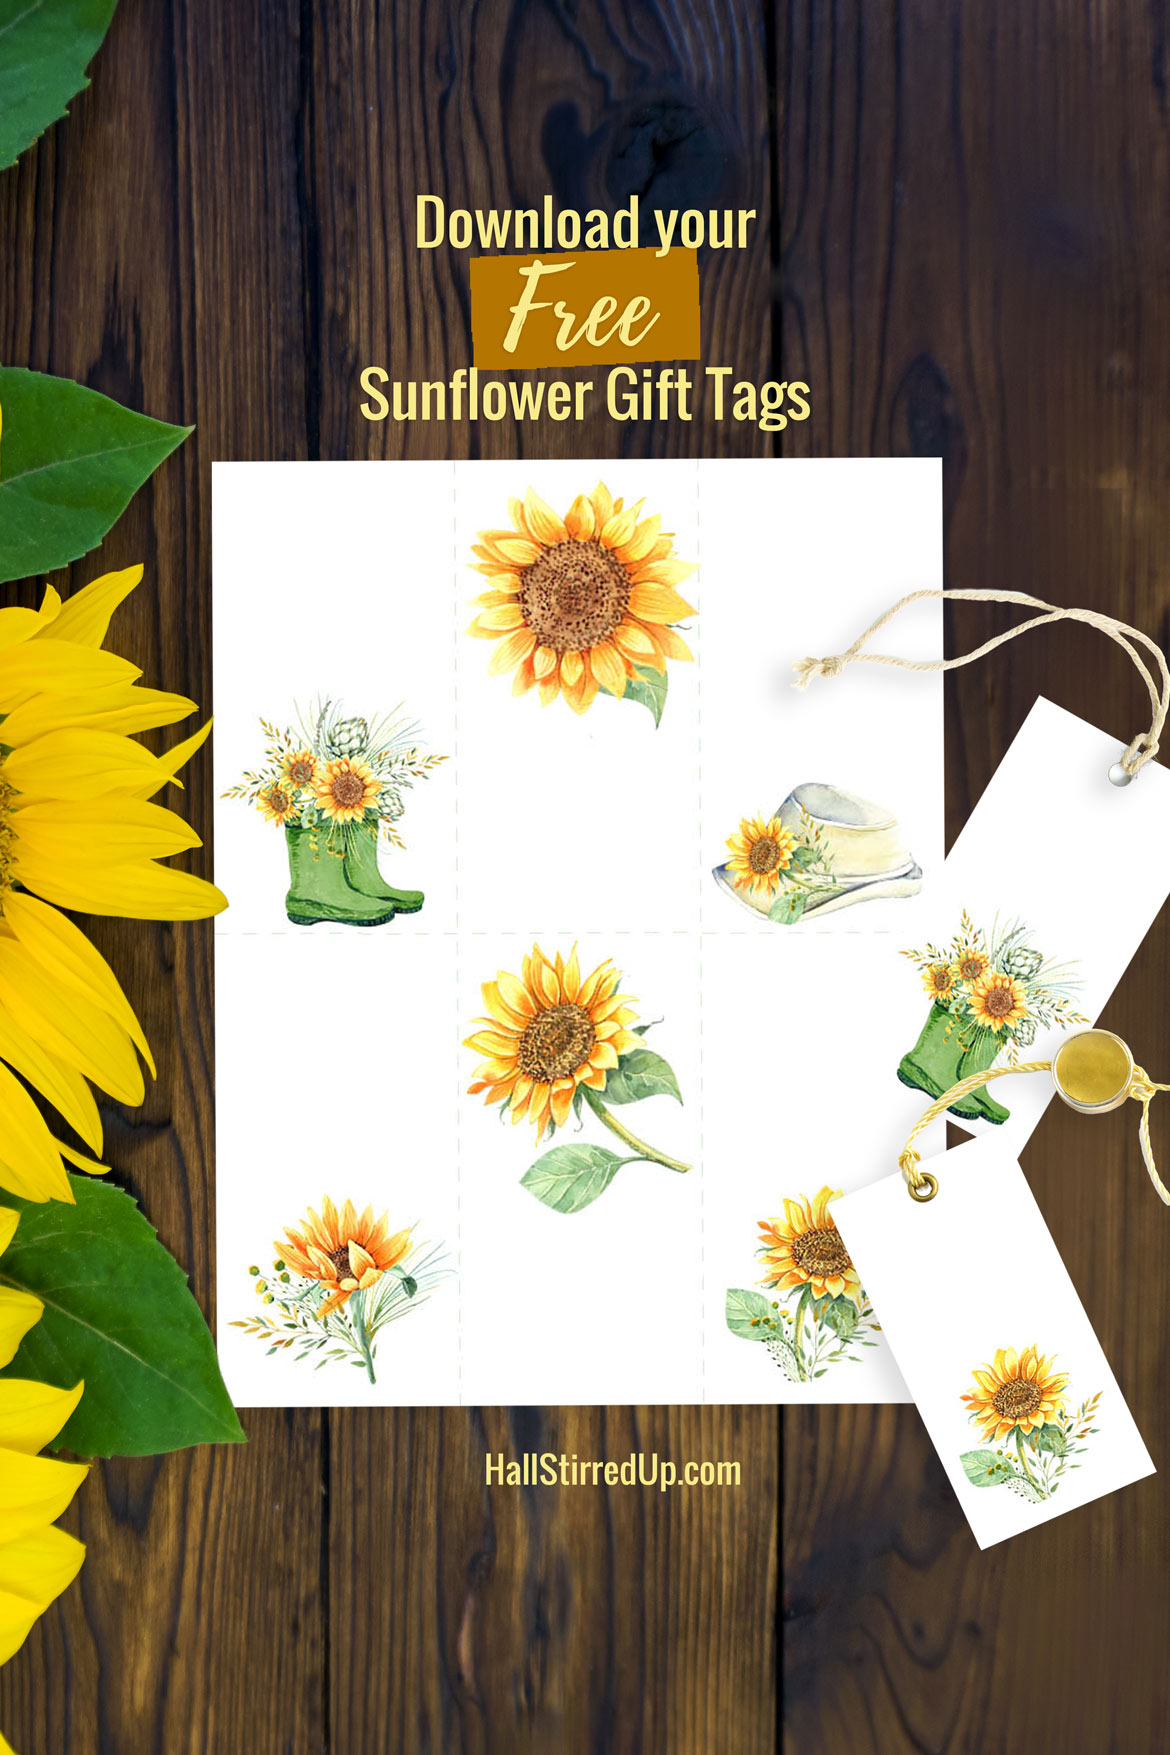 Download a free set of Sunflower gift tags